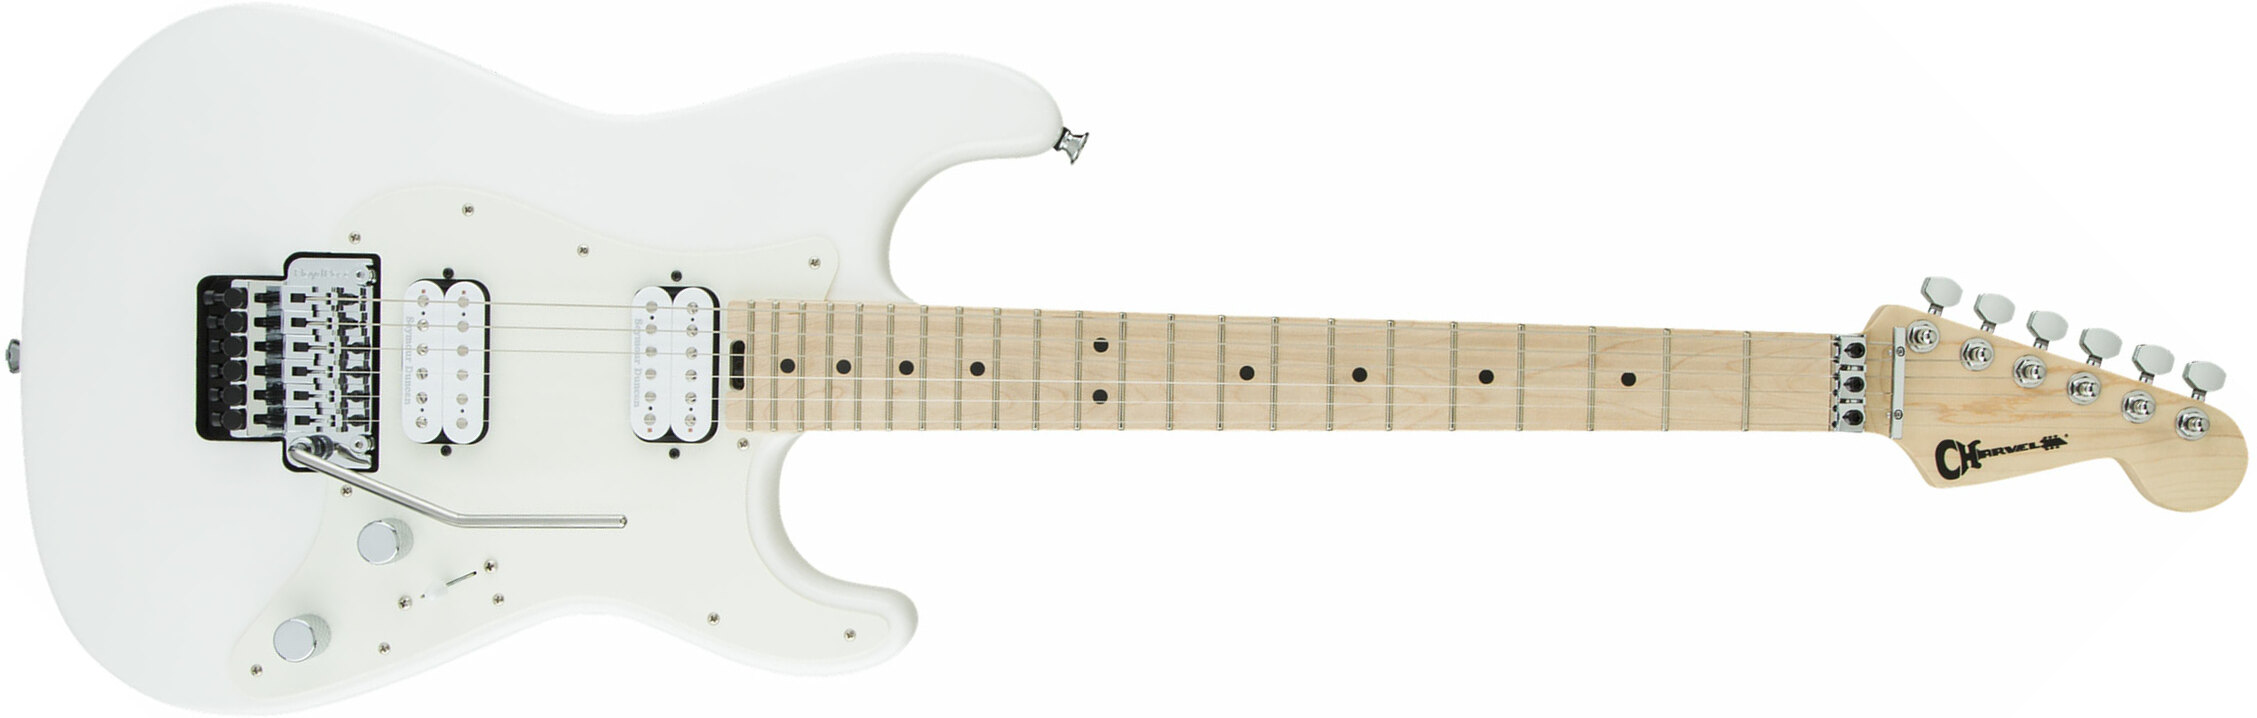 Charvel Pro-mod So Cal Style 1 Hh  Fr M Seymour Duncan Mn - Snow White - Str shape electric guitar - Main picture